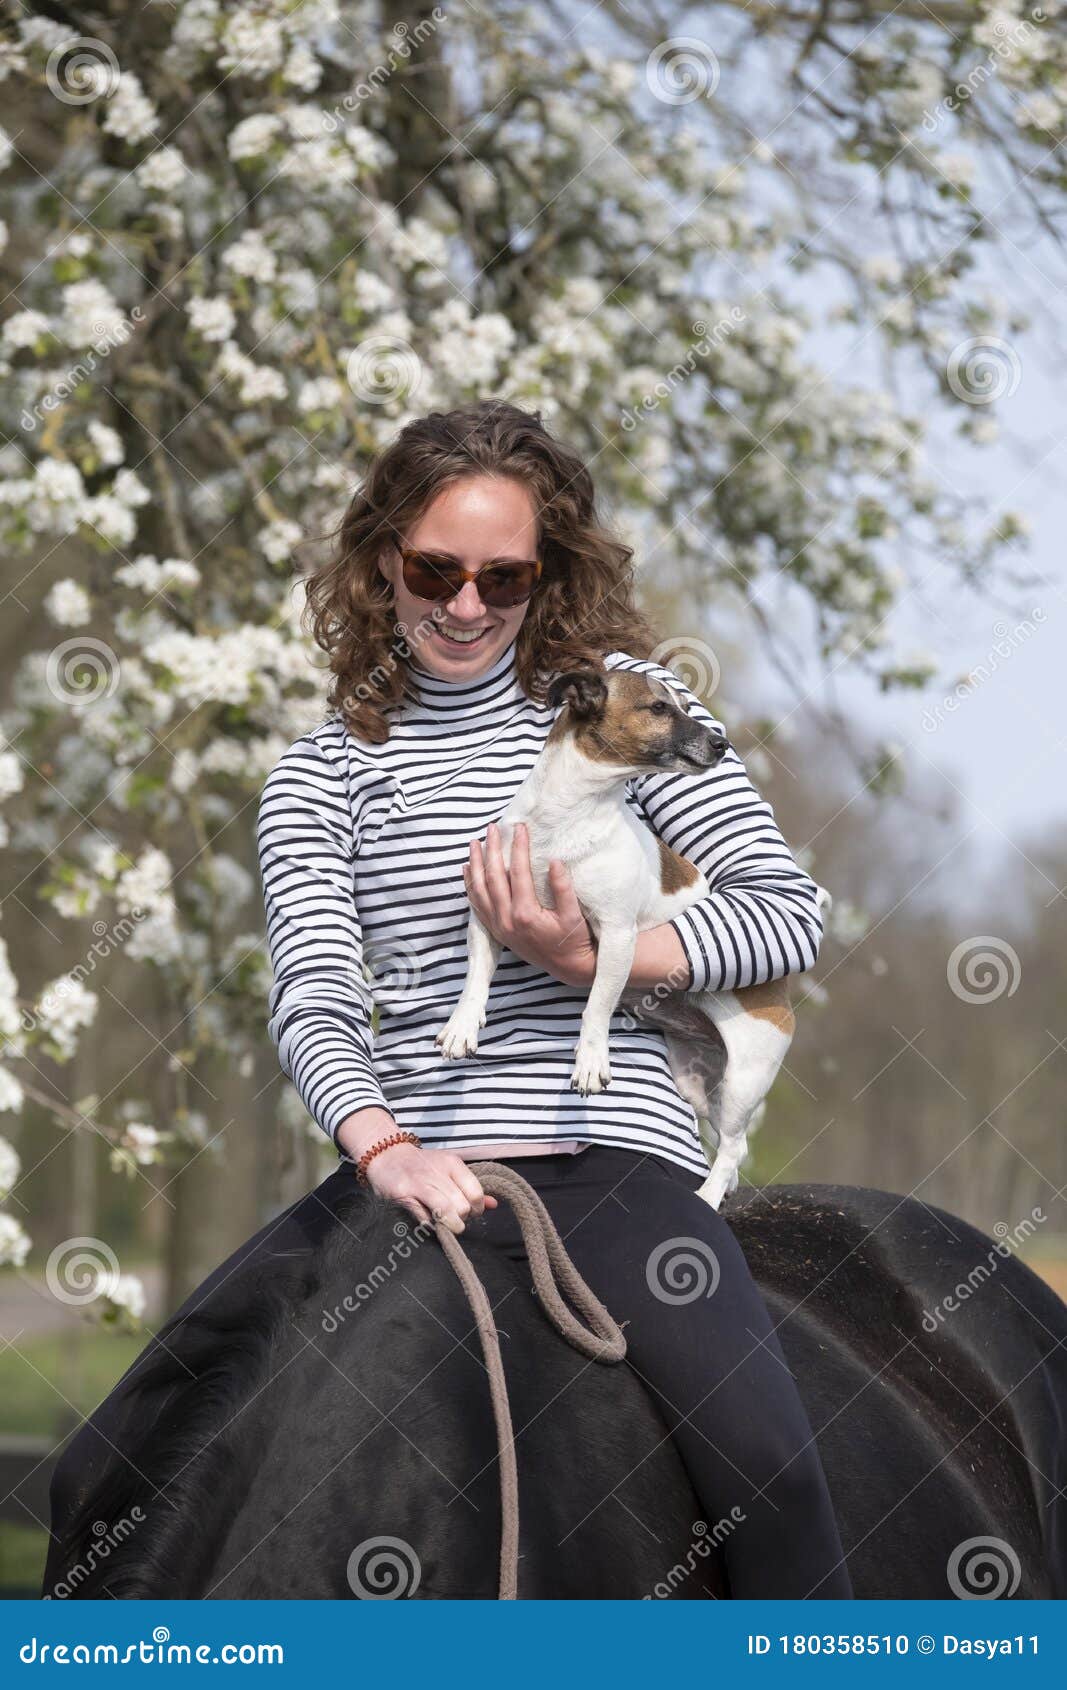 Close Up Of A Girl On A Pregnant Brown Horse Without A Saddle She Has A Little Dog In Her Arm White Blossom Stock Photo Image Of Mane Affection 180358510,Perennial Flowers Texas